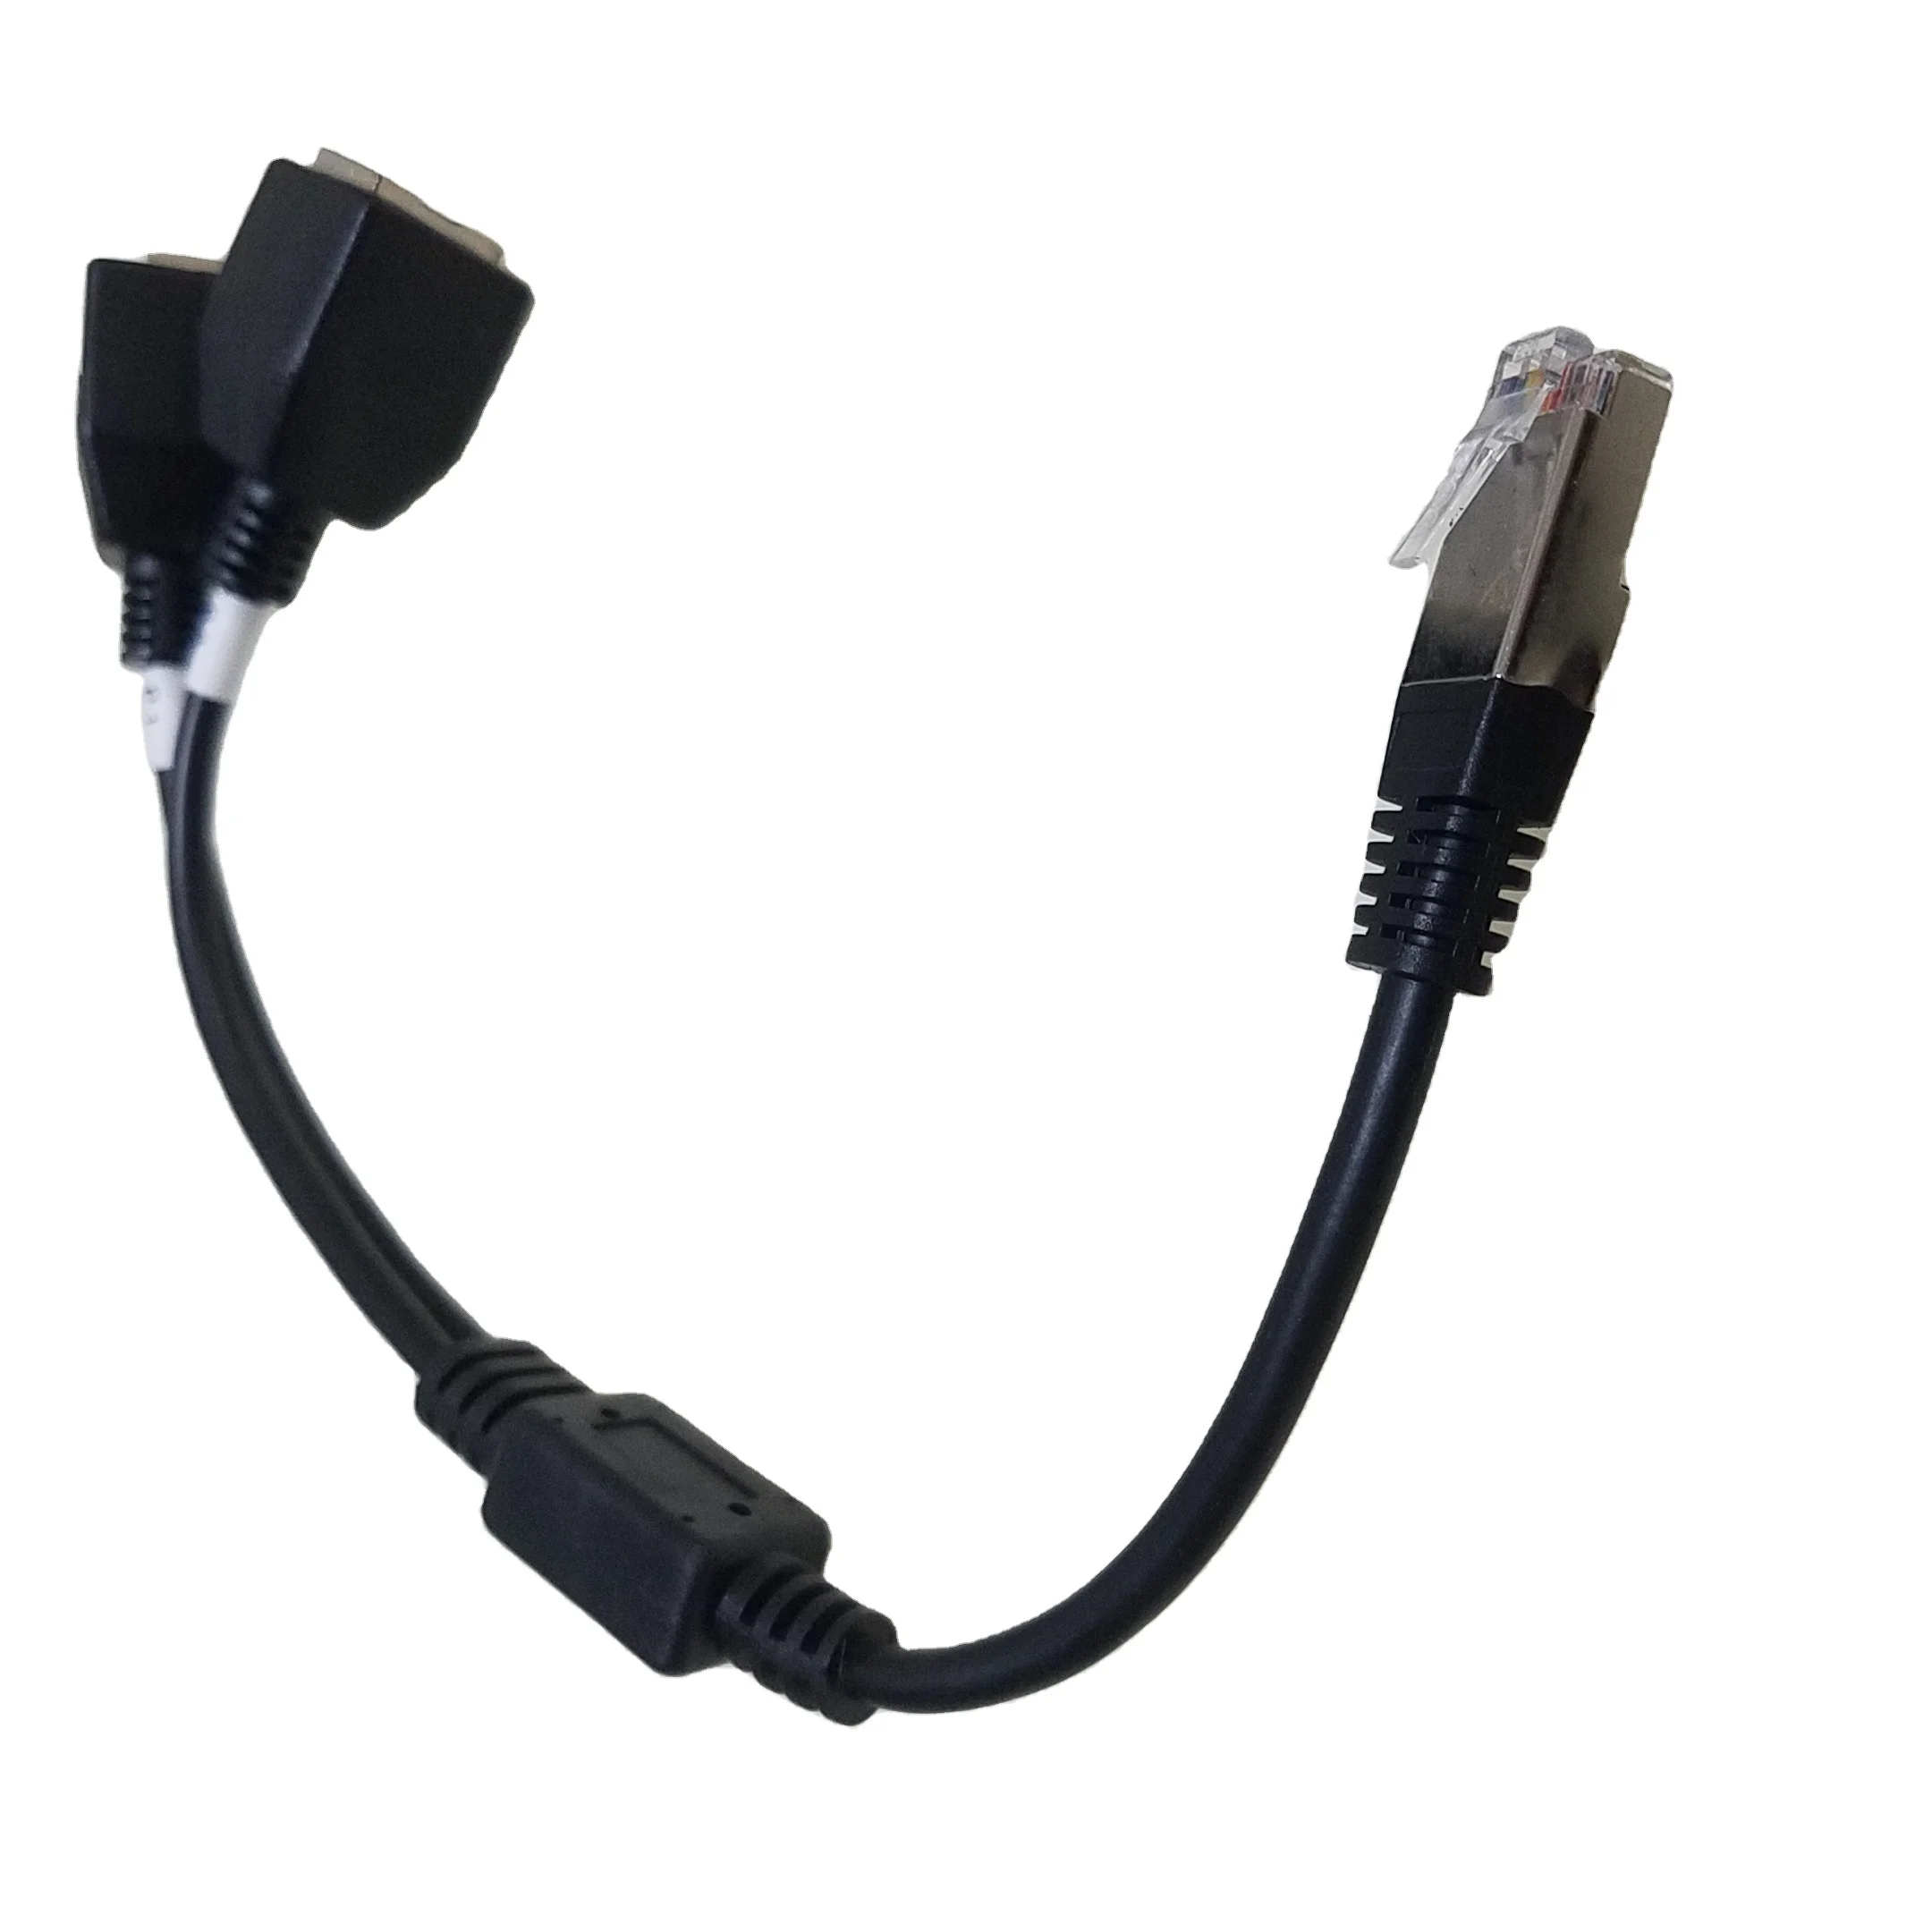 Customize short RJ45 male to 2 female splitter ethernet cable (62038517356)